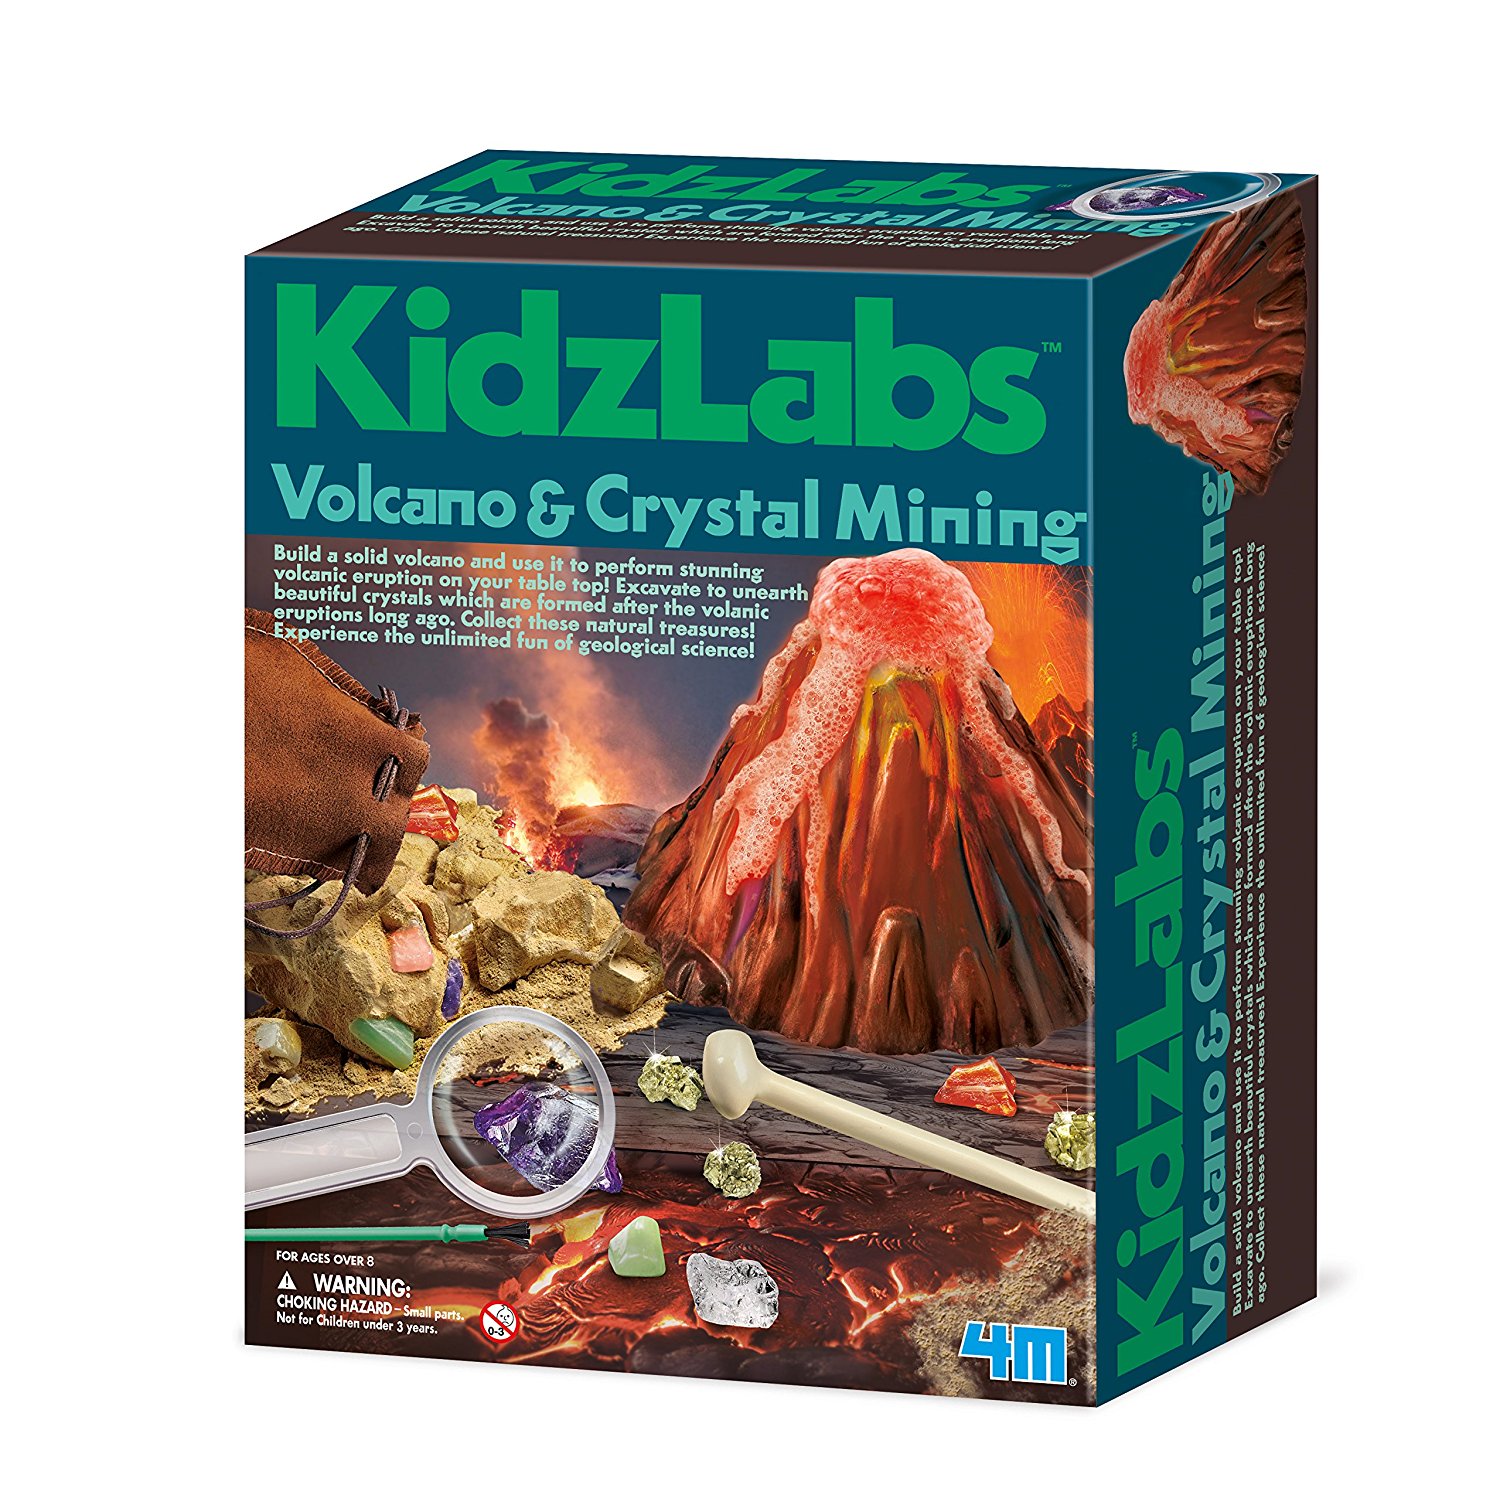 Best Volcano Kits for Kids: 4M Volcano and Crystal Mining Kit